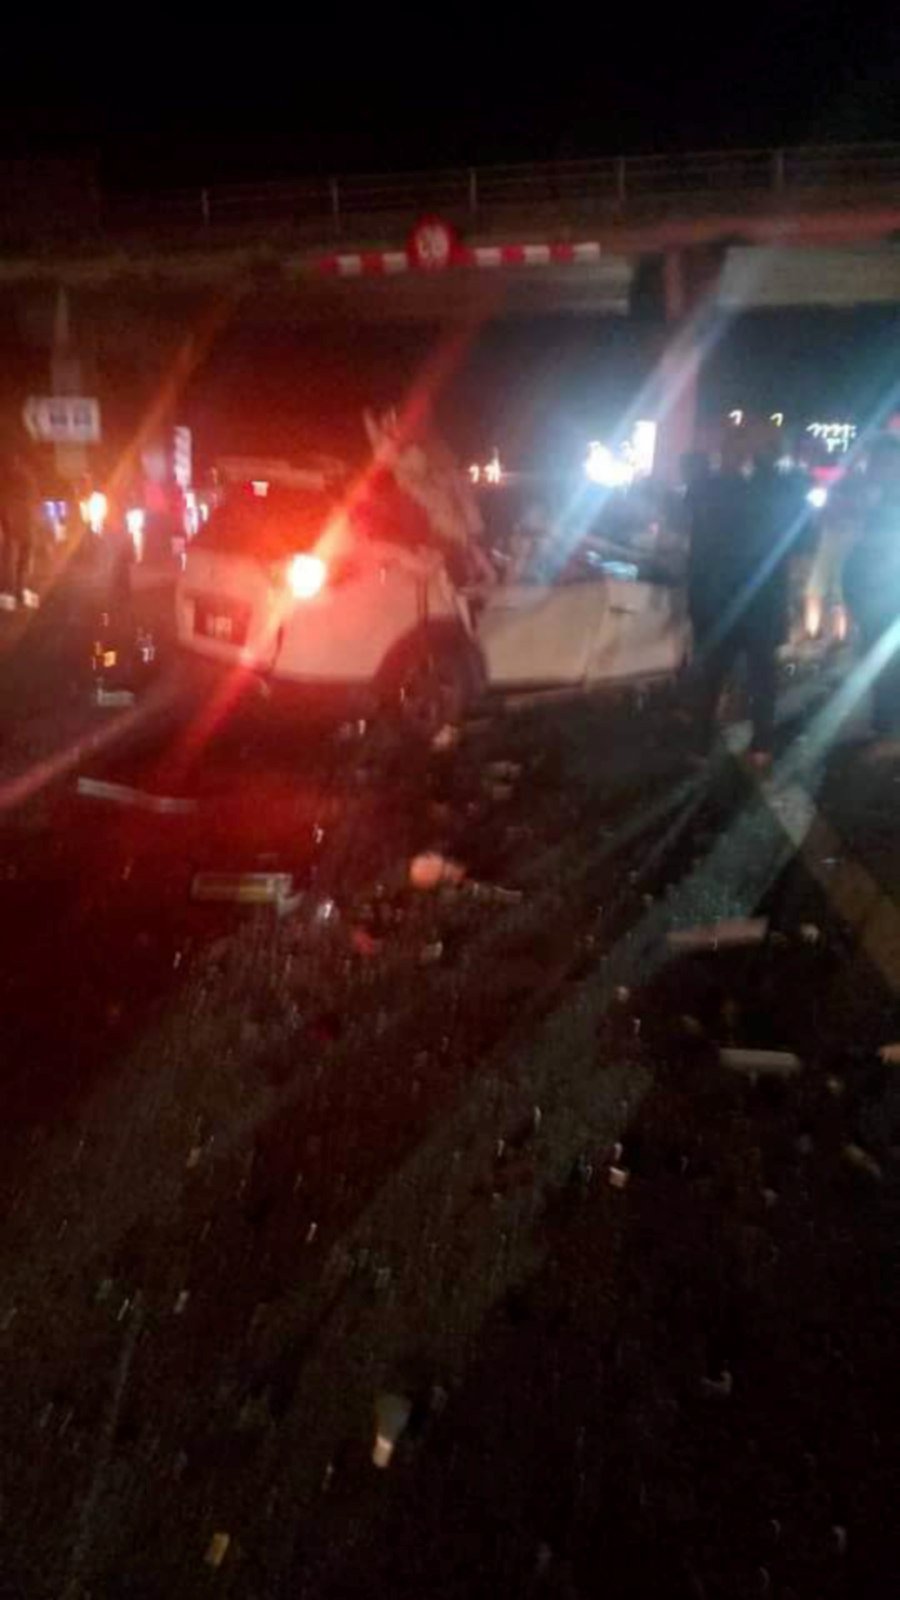 Nurakma Mohd Kalimuddin, a Media Prima advertising executive who suffered a miscarriage following this horrific three-vehicle crash on the North-South Expressway in Johor, has been put in an induced coma after suffering a traumatic brain injury. Pic sourced from social media